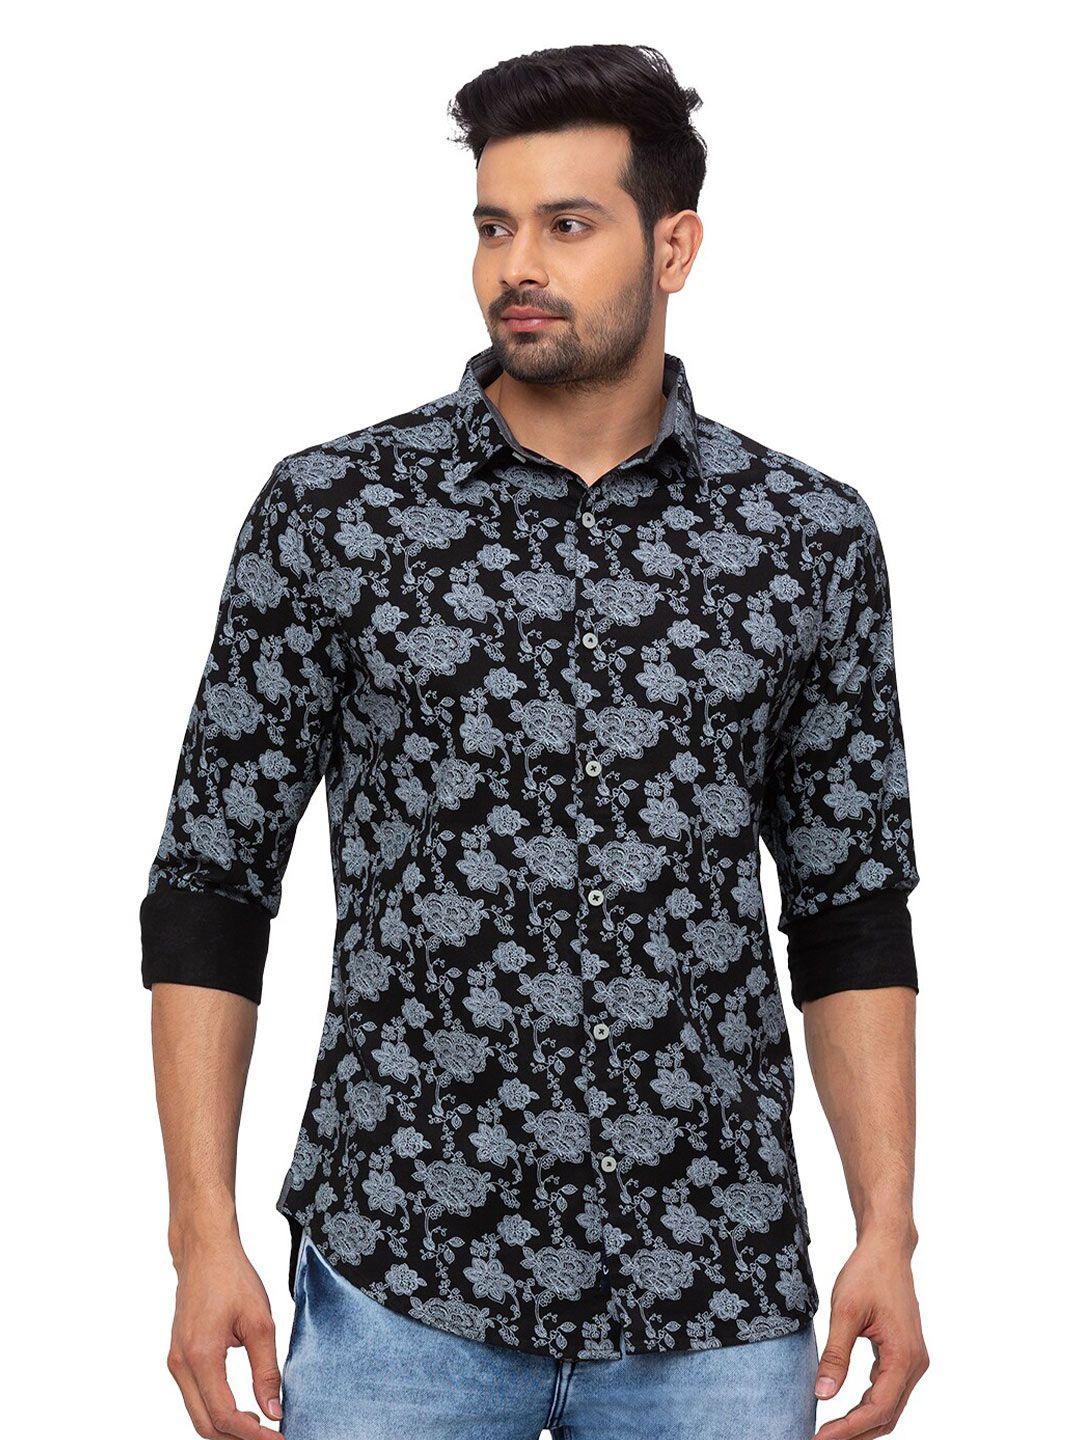 snx classic tailored fit floral printed pure cotton casual shirt